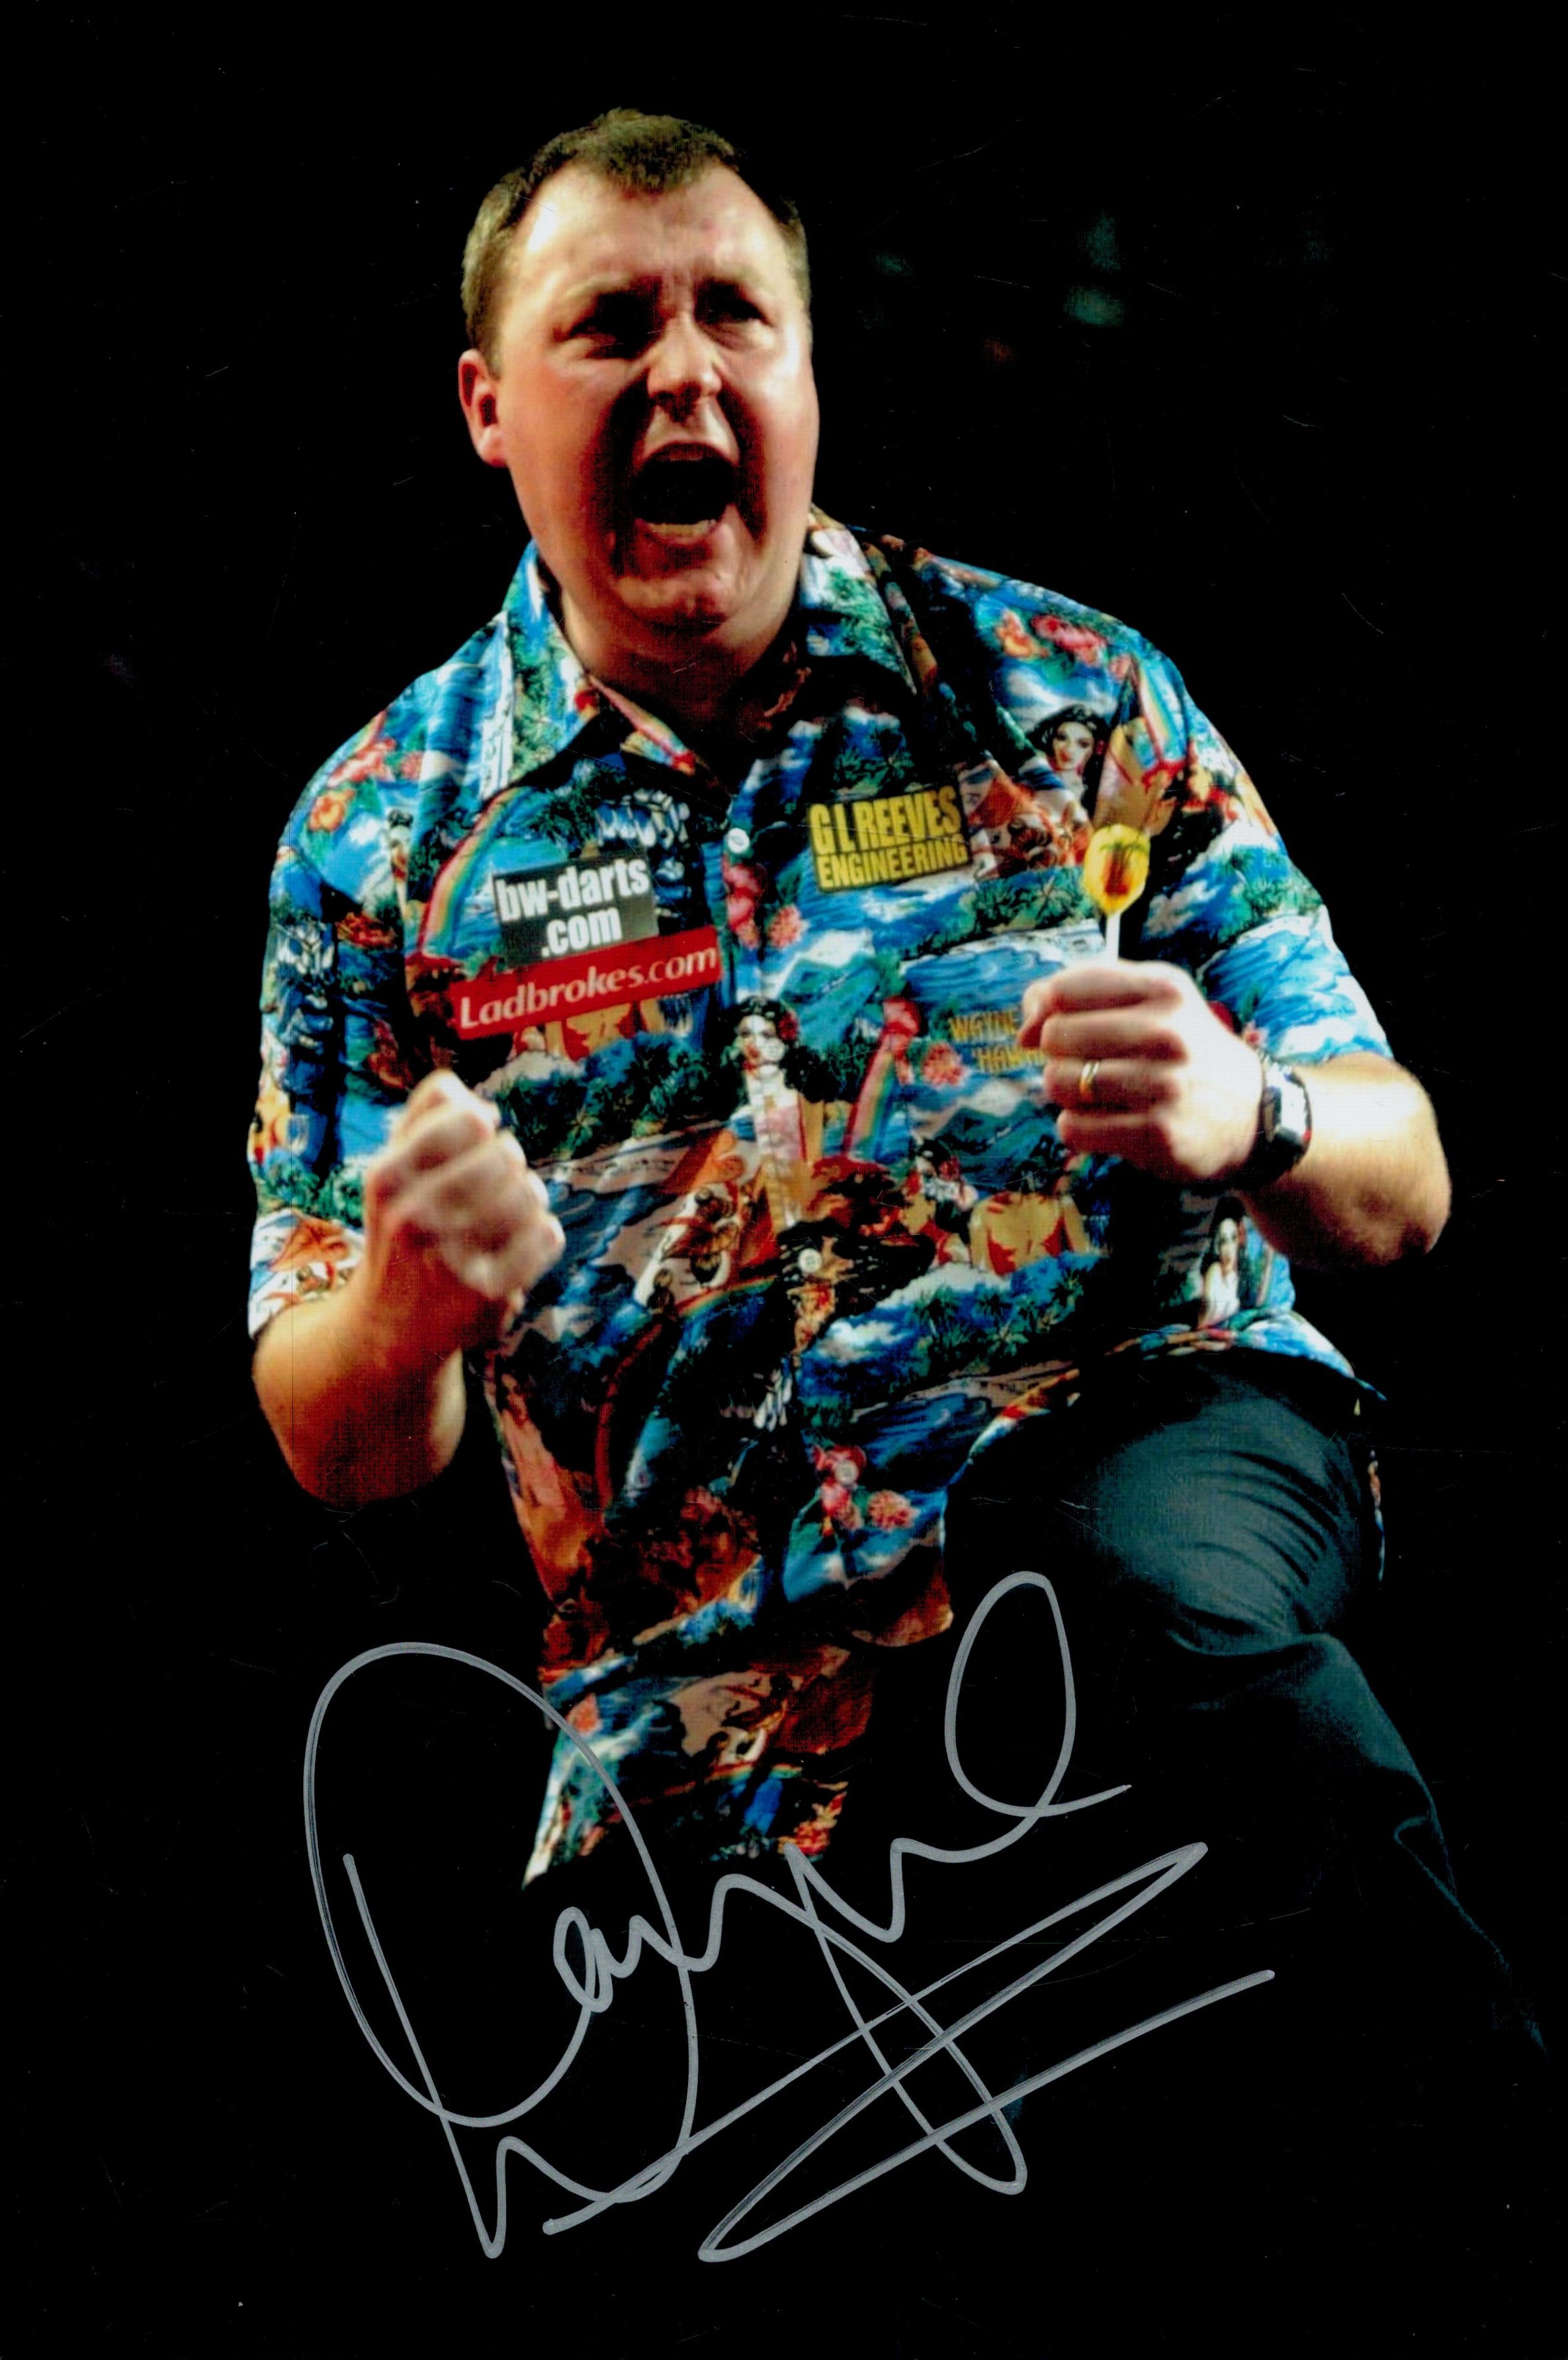 Darts collection 5, signed 12x8 inch colour photos includes legends other game such as Bob Anderson, - Image 3 of 3